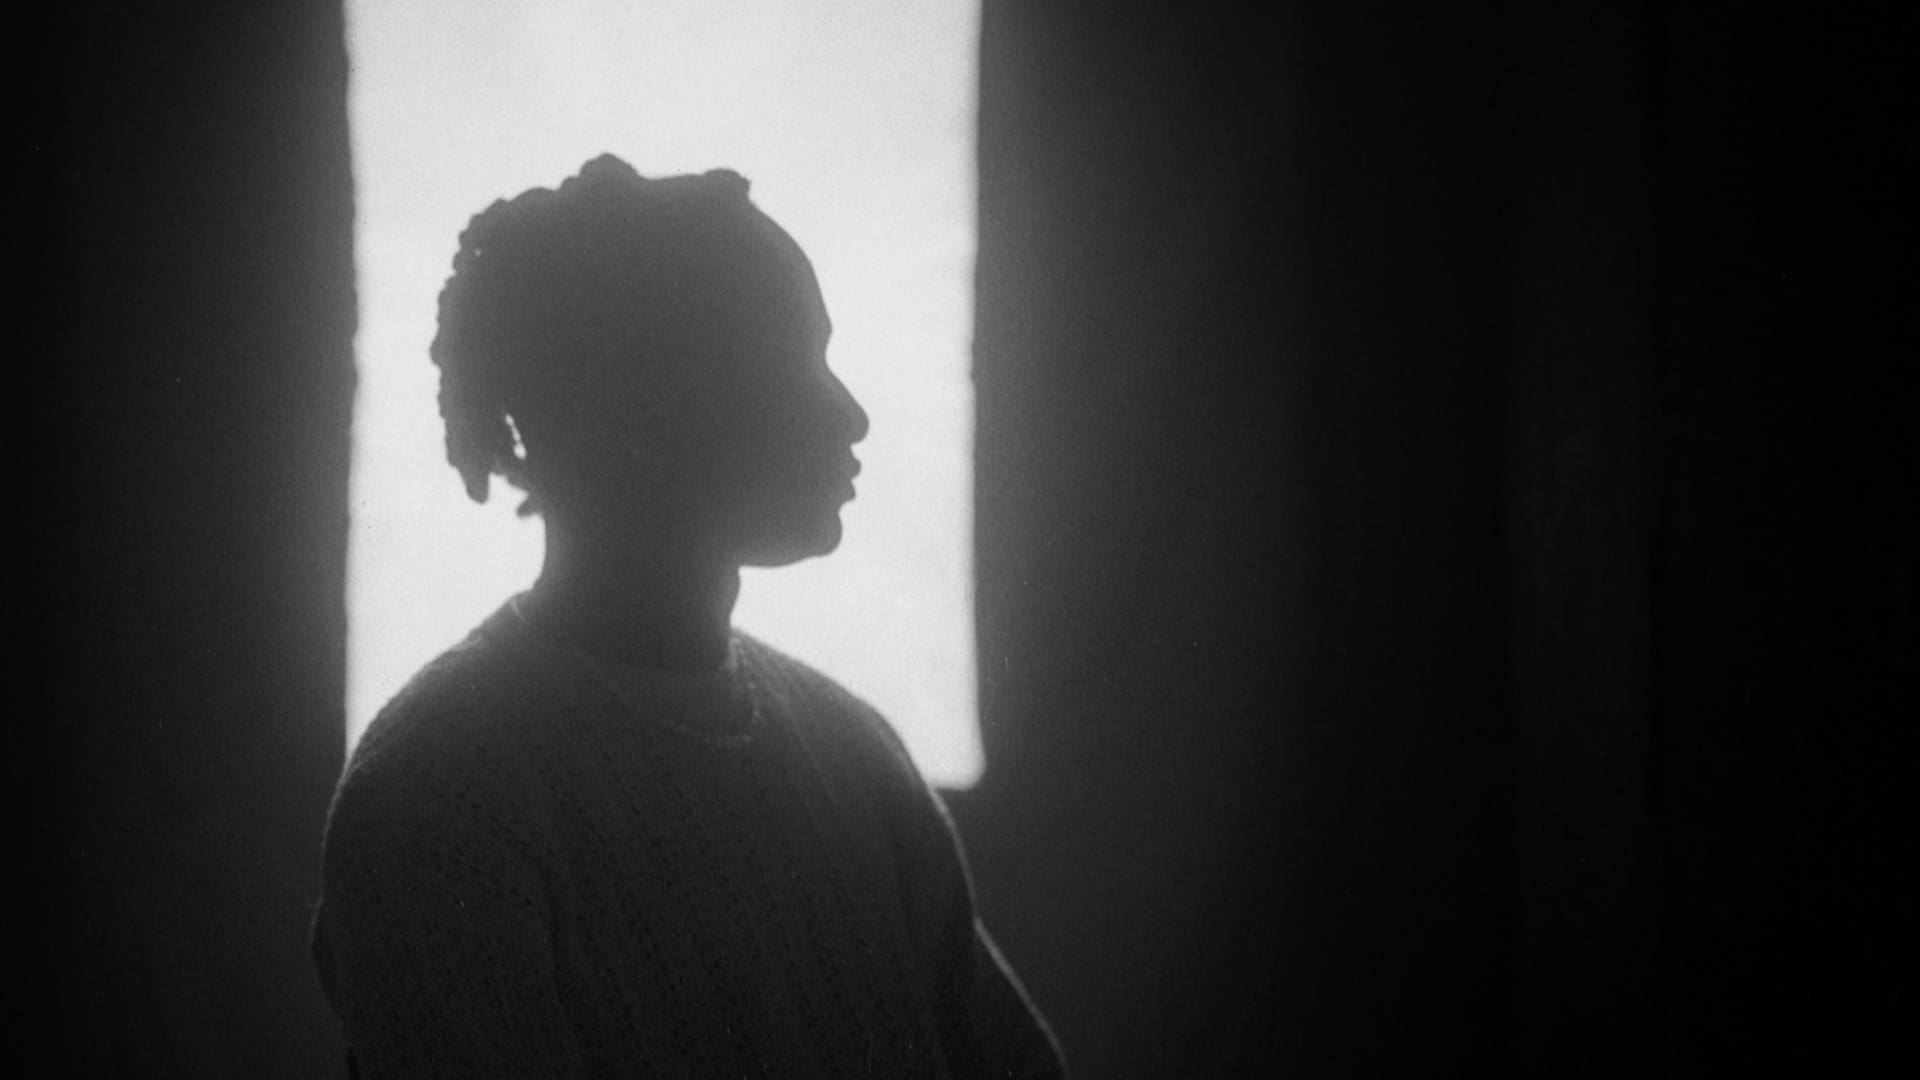 Silhouette of a person in profile against a window light.